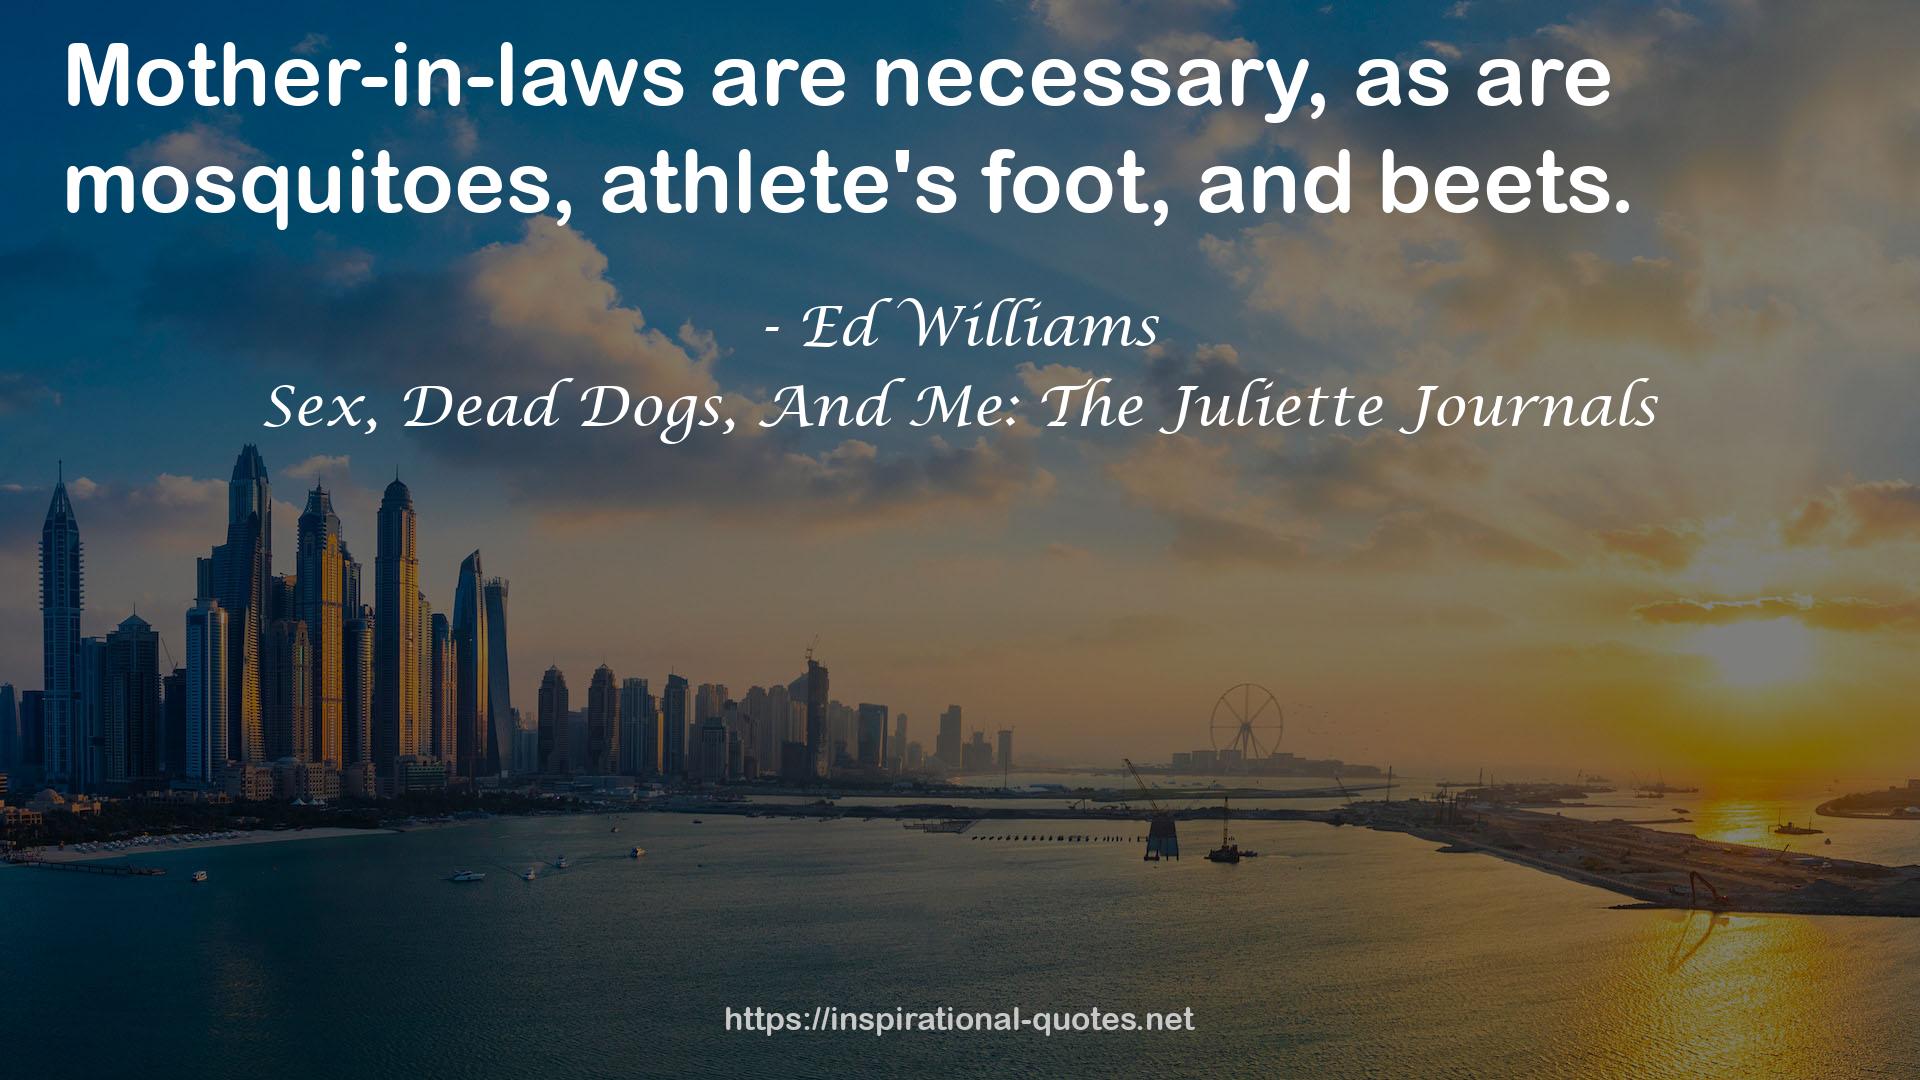 Sex, Dead Dogs, And Me: The Juliette Journals QUOTES